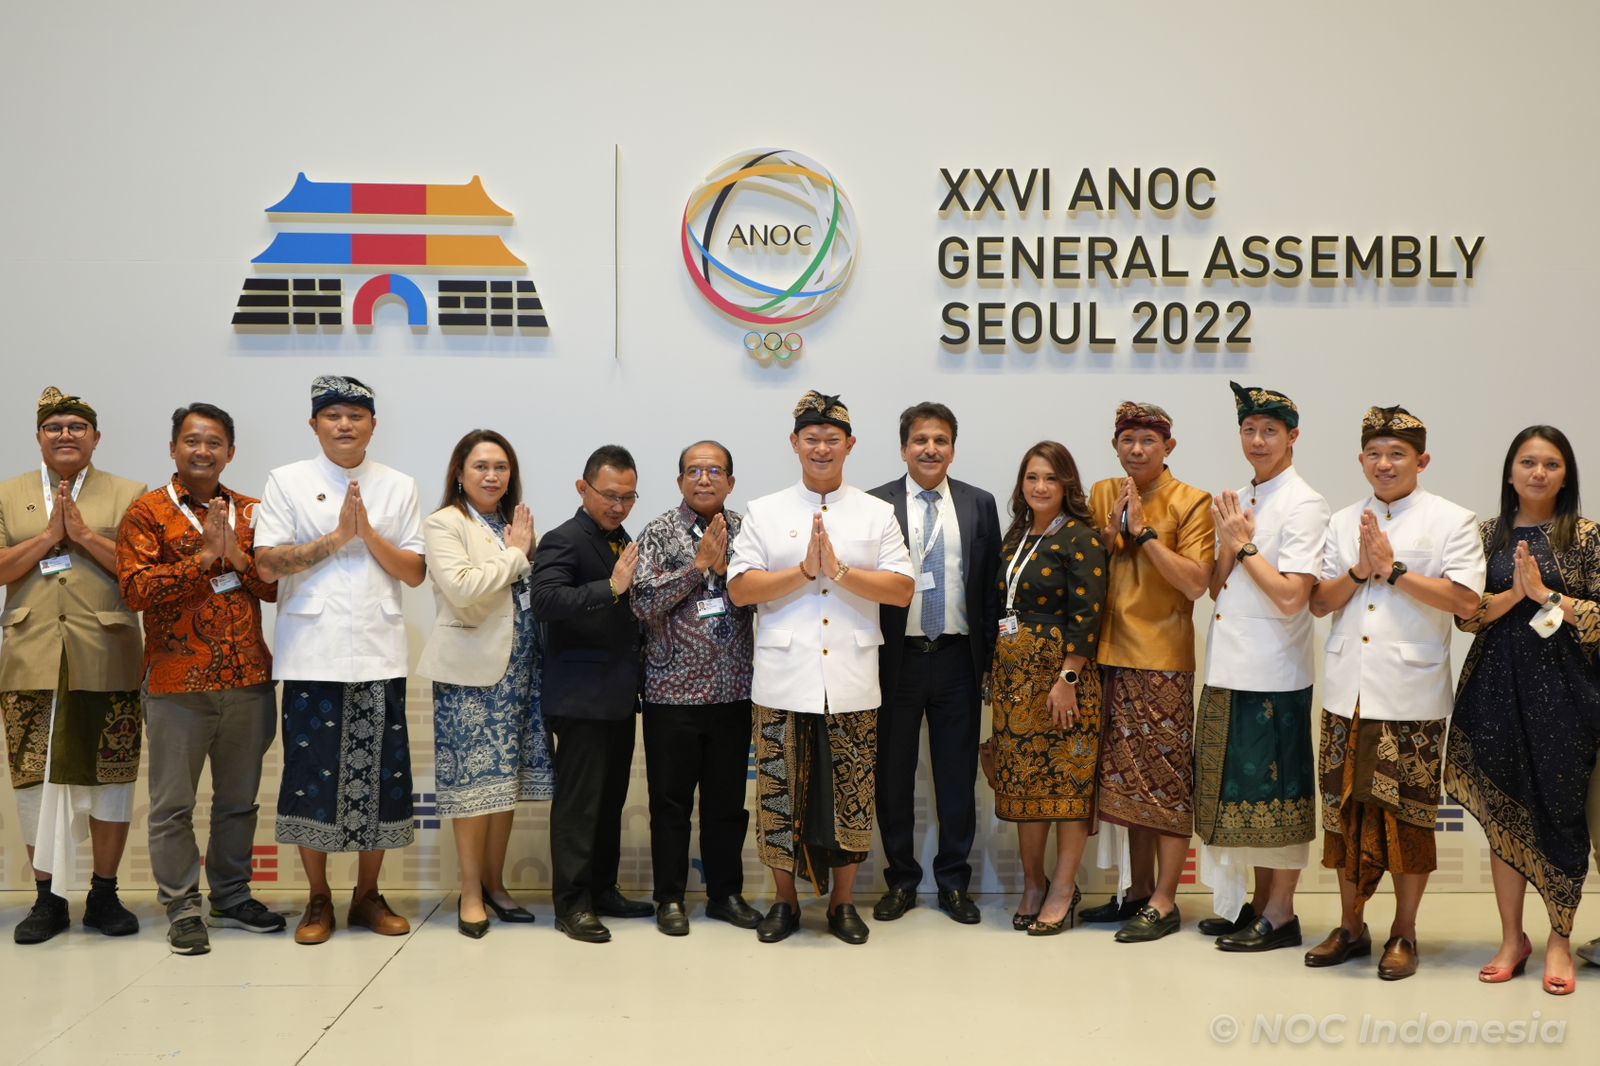 Indonesia Garners Praise As Bali's Exotic Flair The Highlight of ANOC World Beach Games Presentation - Indonesia Olympic Commitee